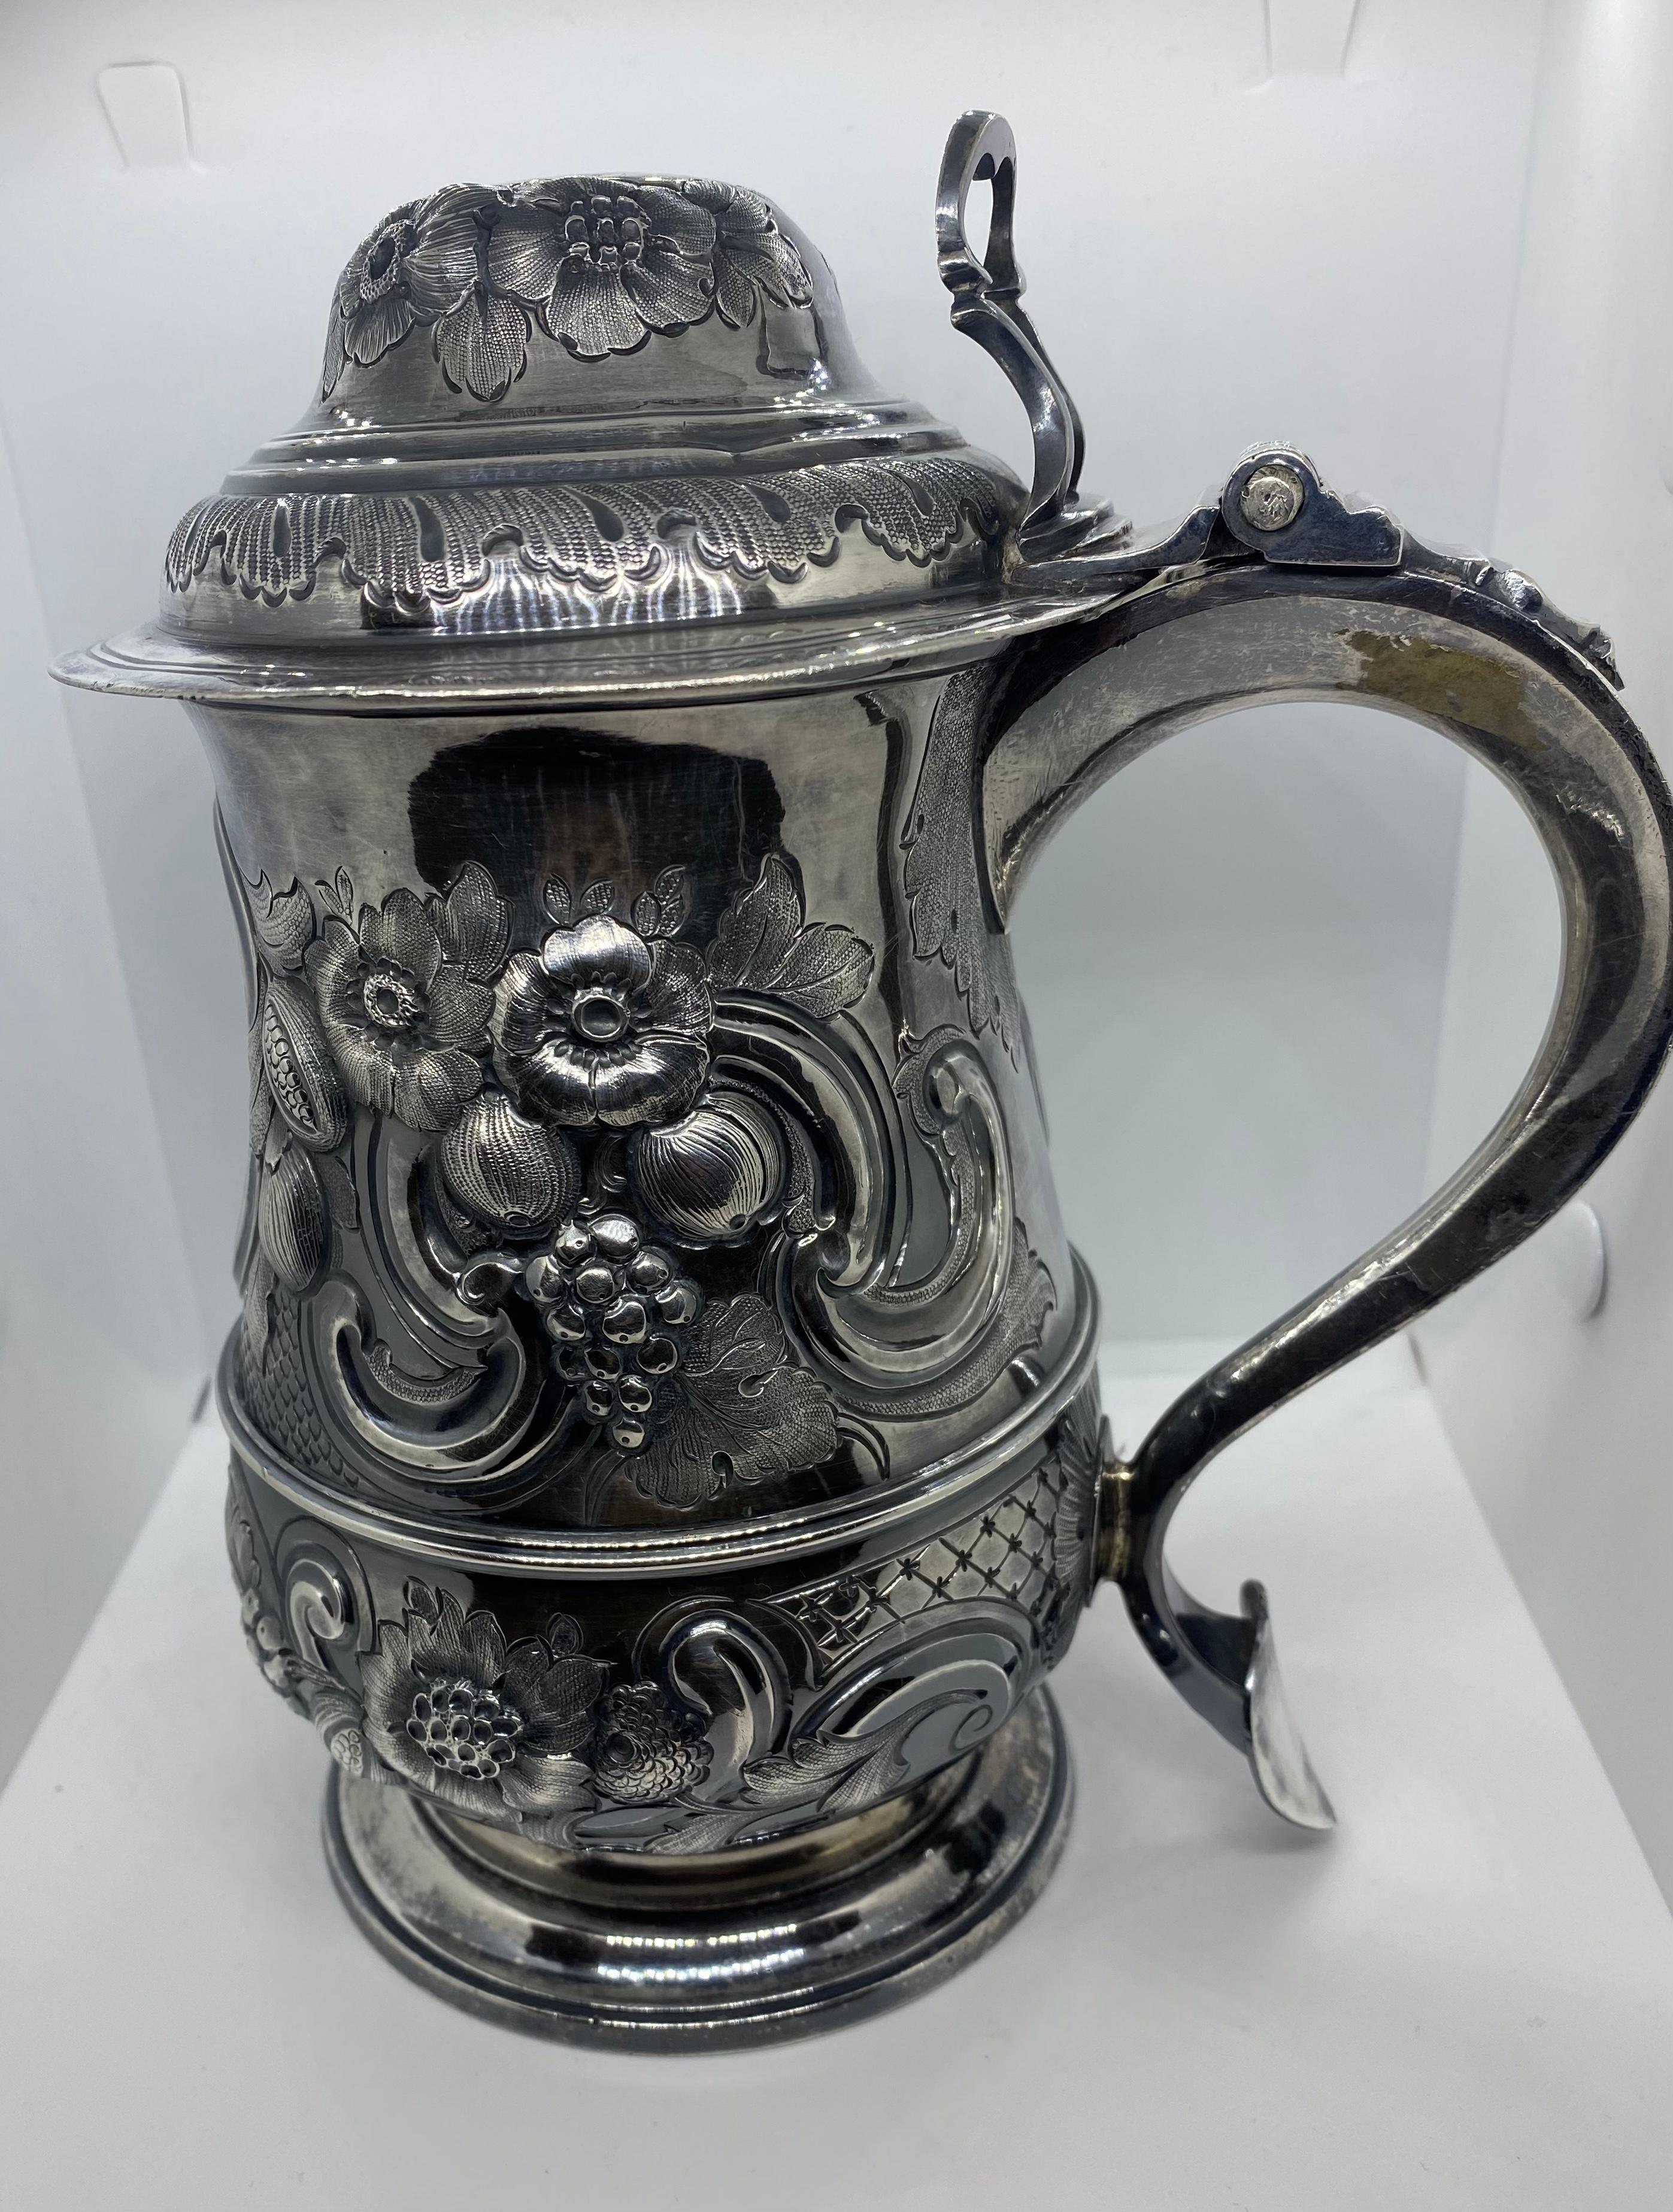 A beautiful GeorgeIII English silver Tankard made in London 1818,
Tankard is embellished with later chased stemmed floral and foliate decoration,hand-embossed with gilt interior.The cover is encircled with two bands of chased floral and foliage